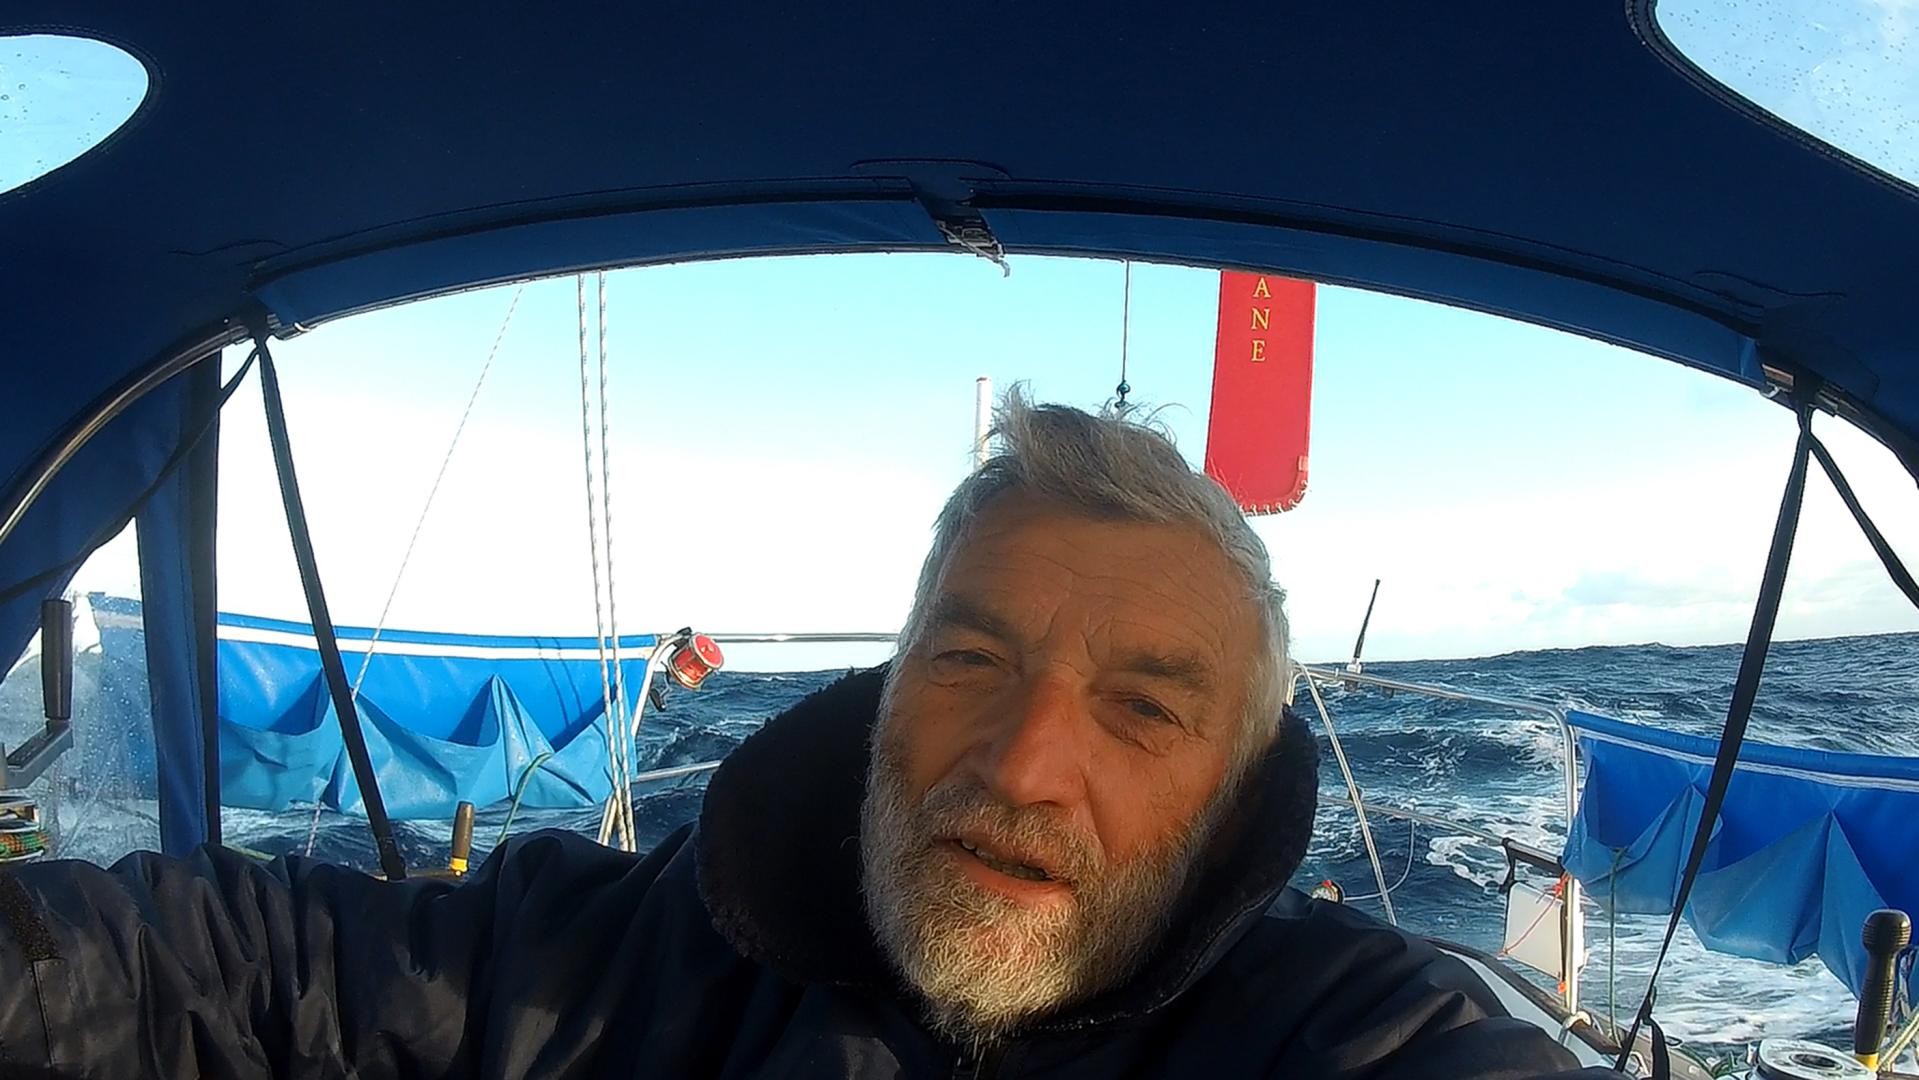 Jean-Luc Van Den Heede now with renewed vigour to complete the Race after deciding to repair his mast at sea